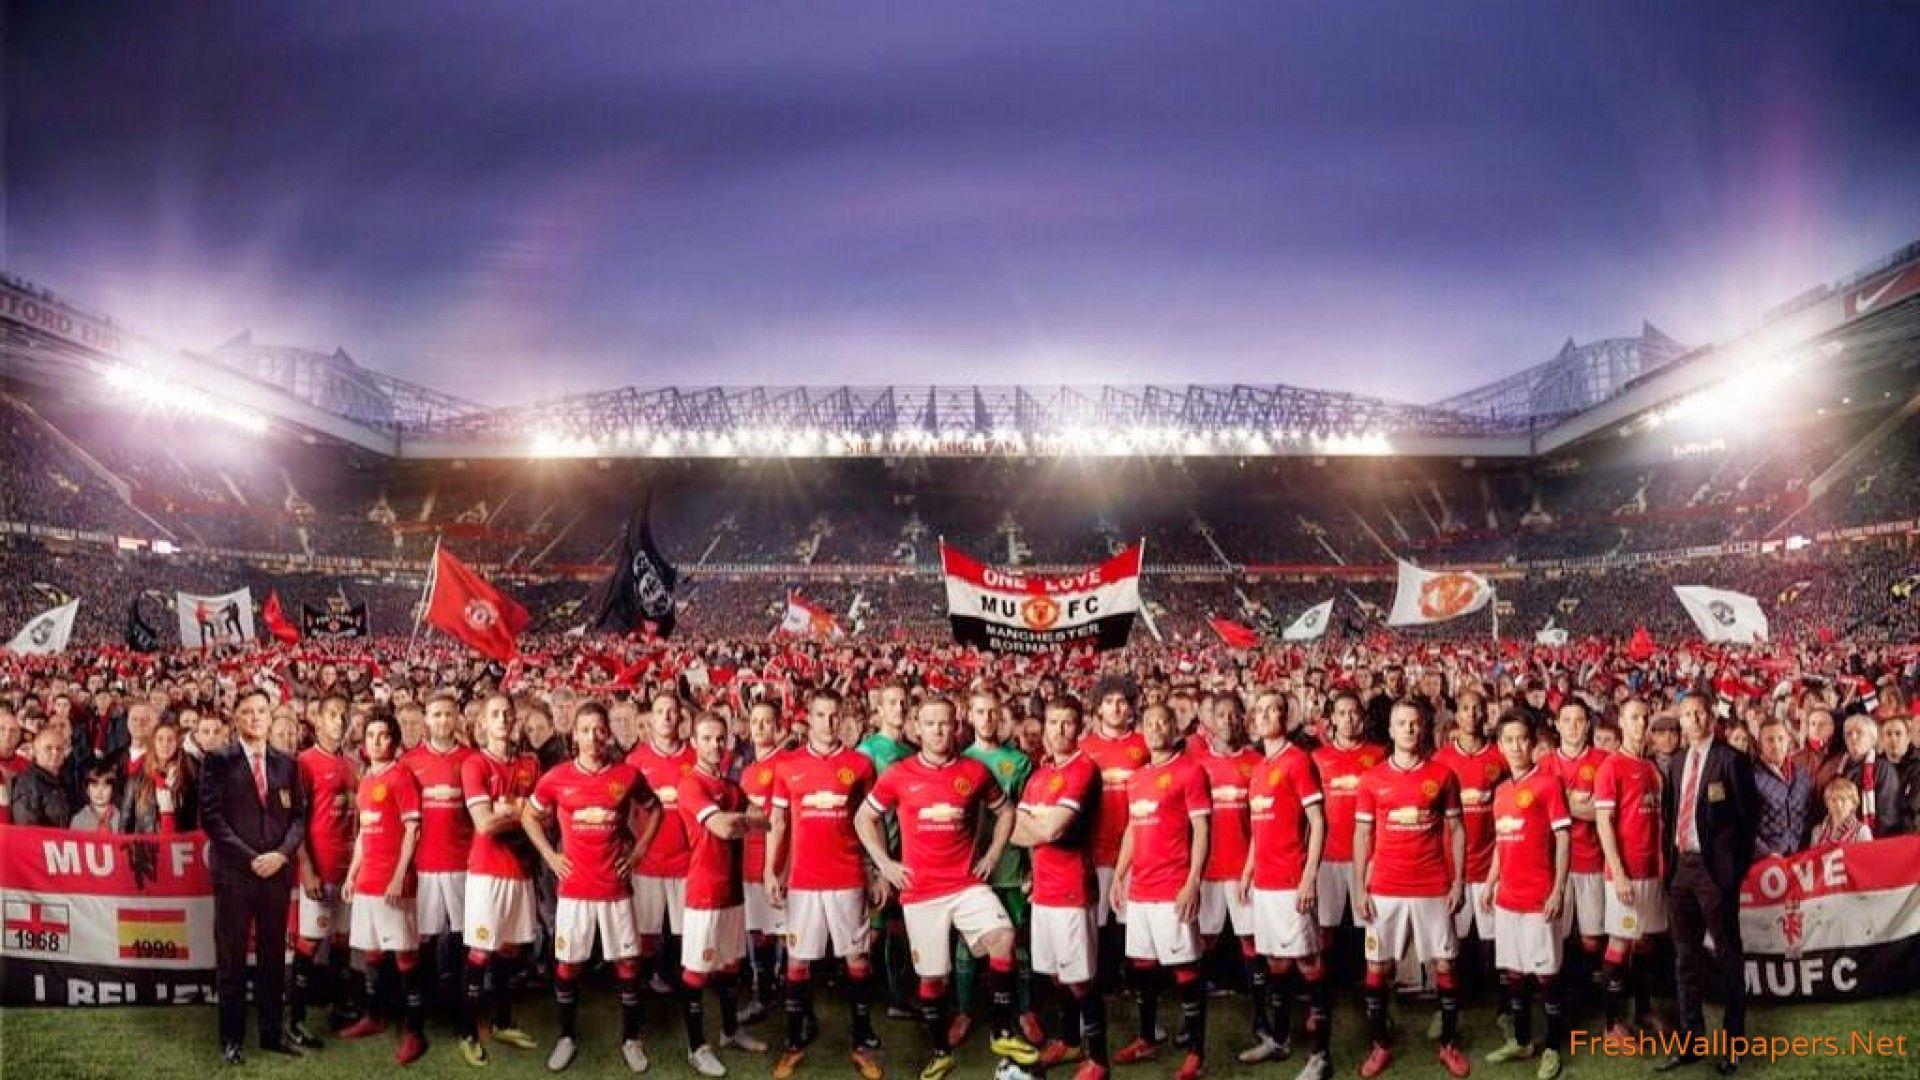 Group of United Wallpaper 2015 Manchester